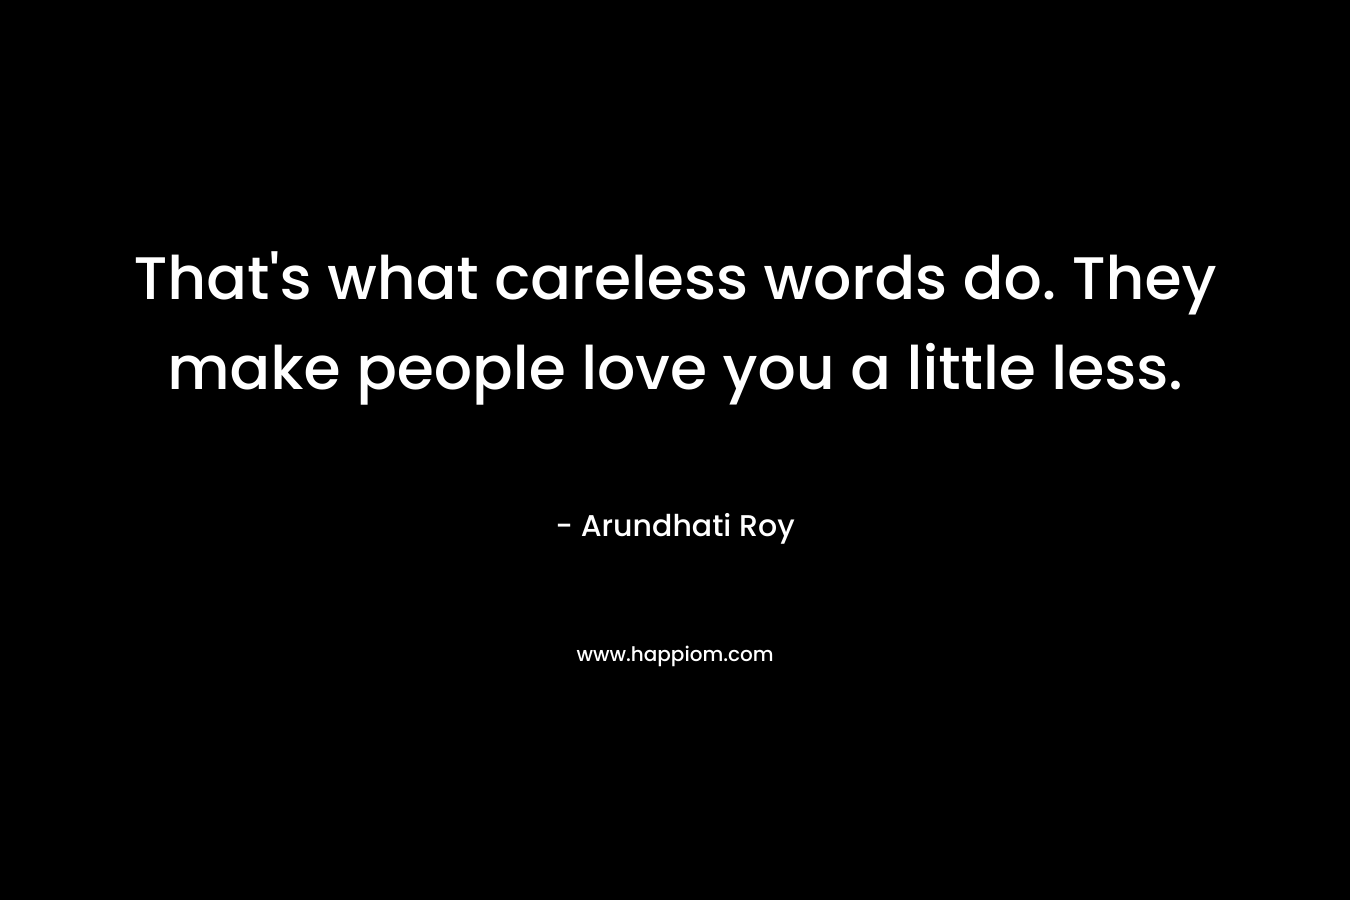 That's what careless words do. They make people love you a little less.